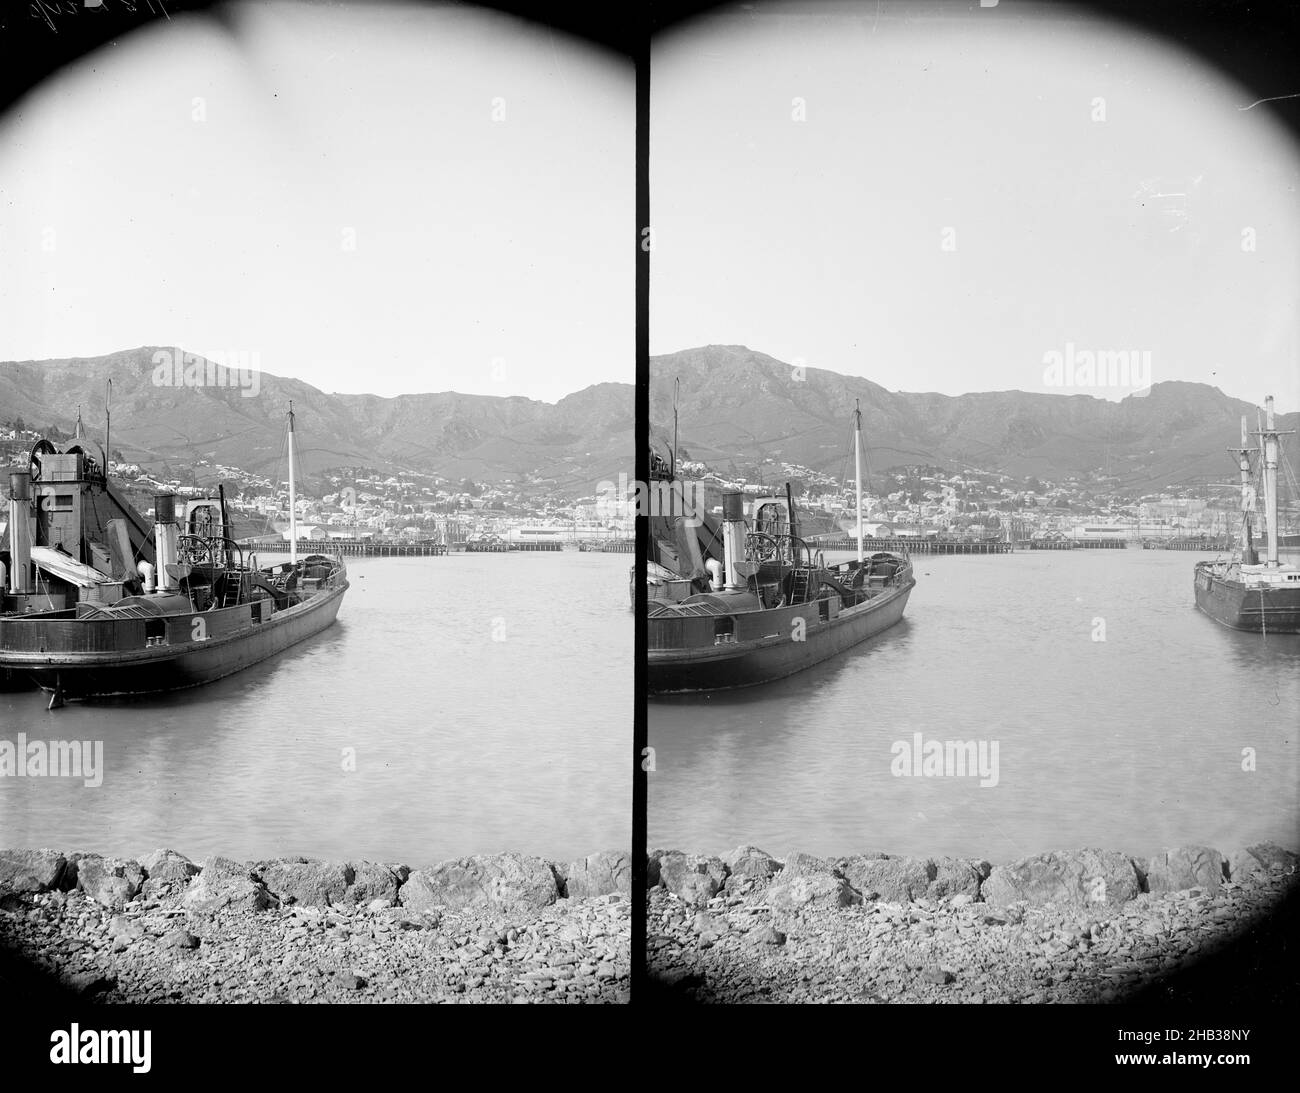 [Lyttelton Harbour, the dredge Manchester], Burton Brothers studio, photography studio, New Zealand, gelatin dry plate process, Stereoscopic view of the dredge Manchester in Lyttleton Harbour Stock Photo